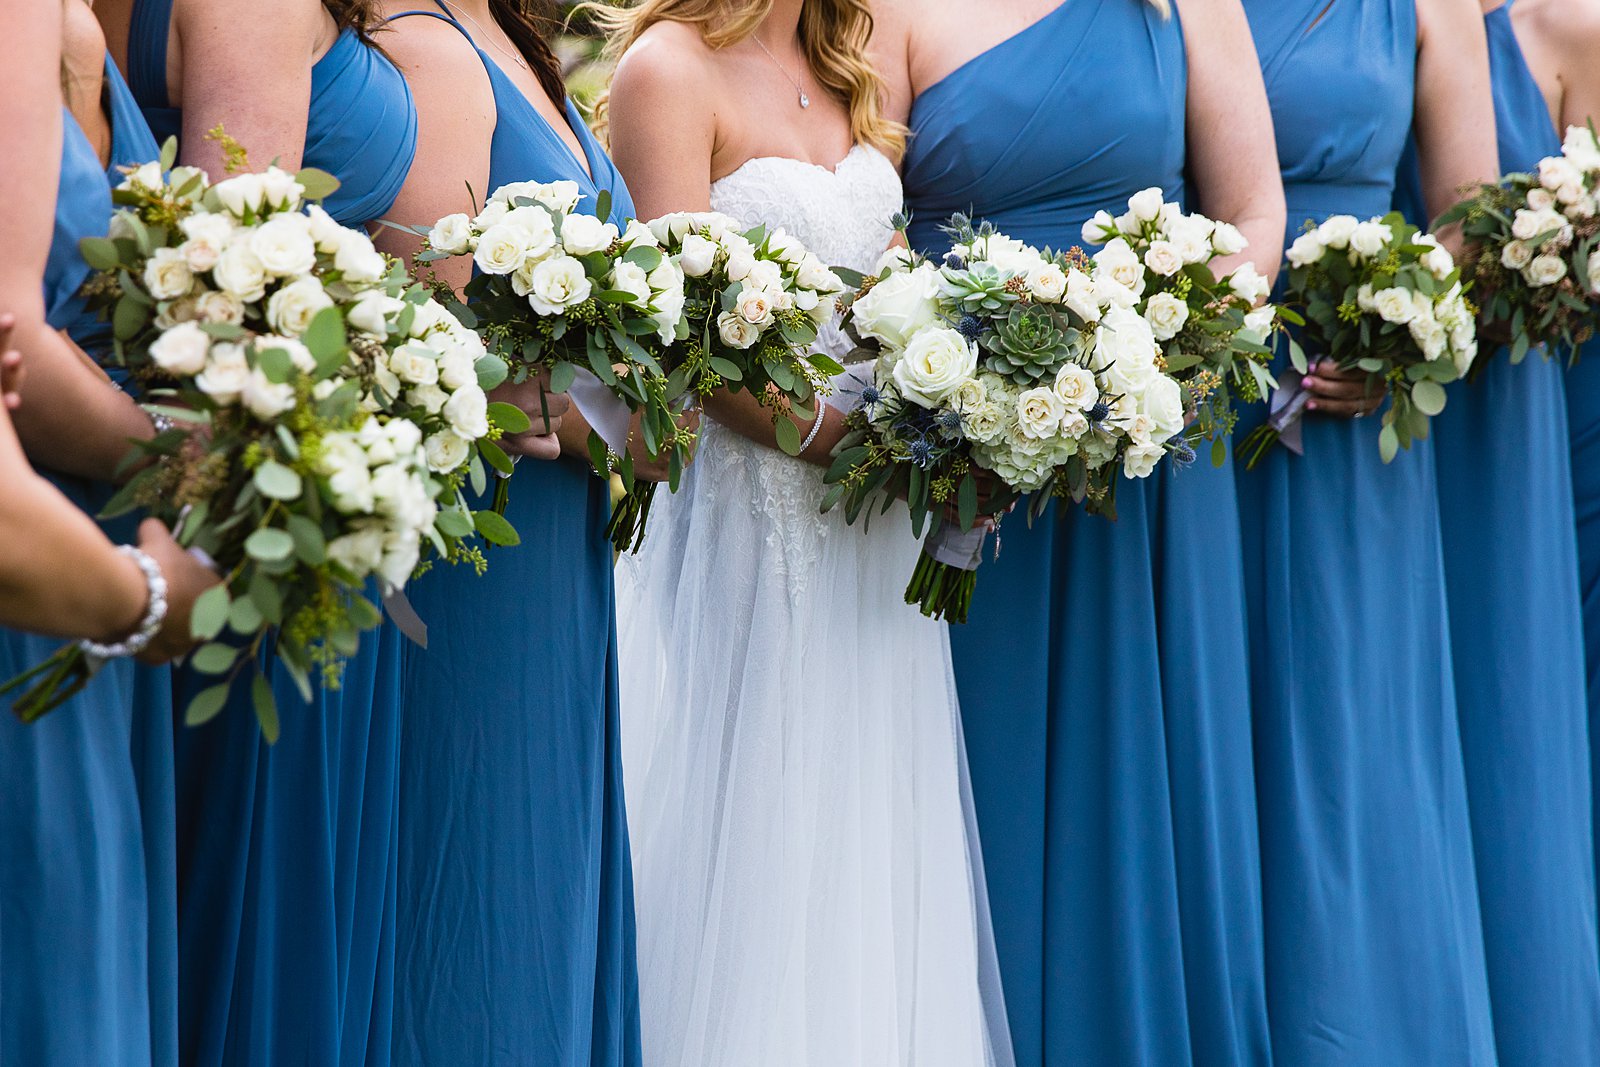 Simple rose and eucalyptus bridesmaids bouquet on blue wedding dresses by PMA Photography.